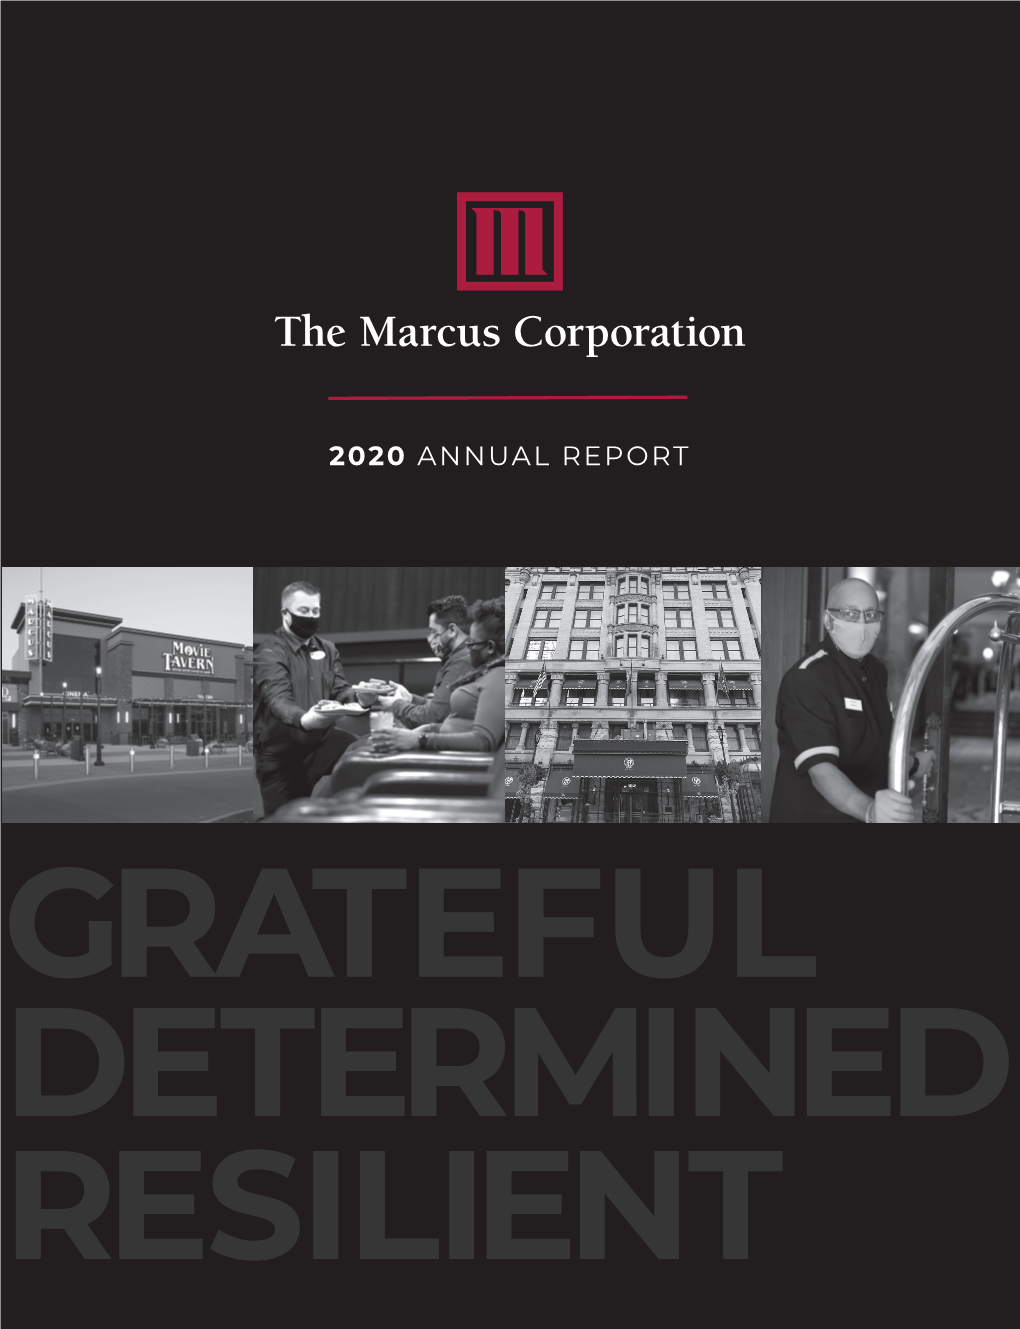 The Marcus Corporation Has Been Worked Day and Night to Get Us Through This Crisis, All While Resilient in the Face of Adversity